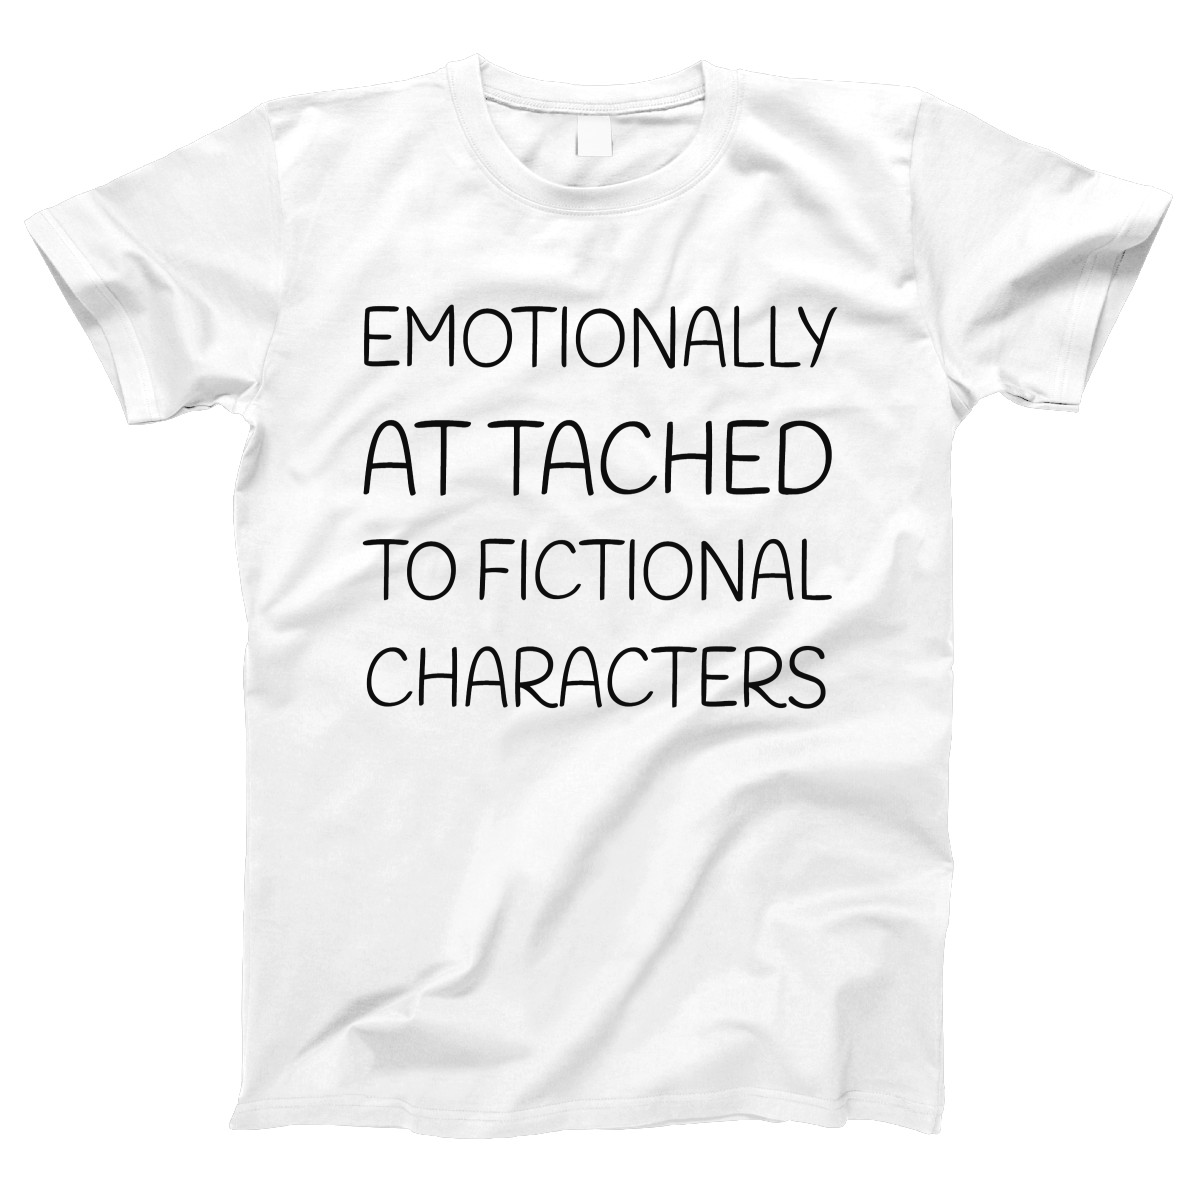 Emotionally Attached to Fictional Characters Women's T-shirt | White